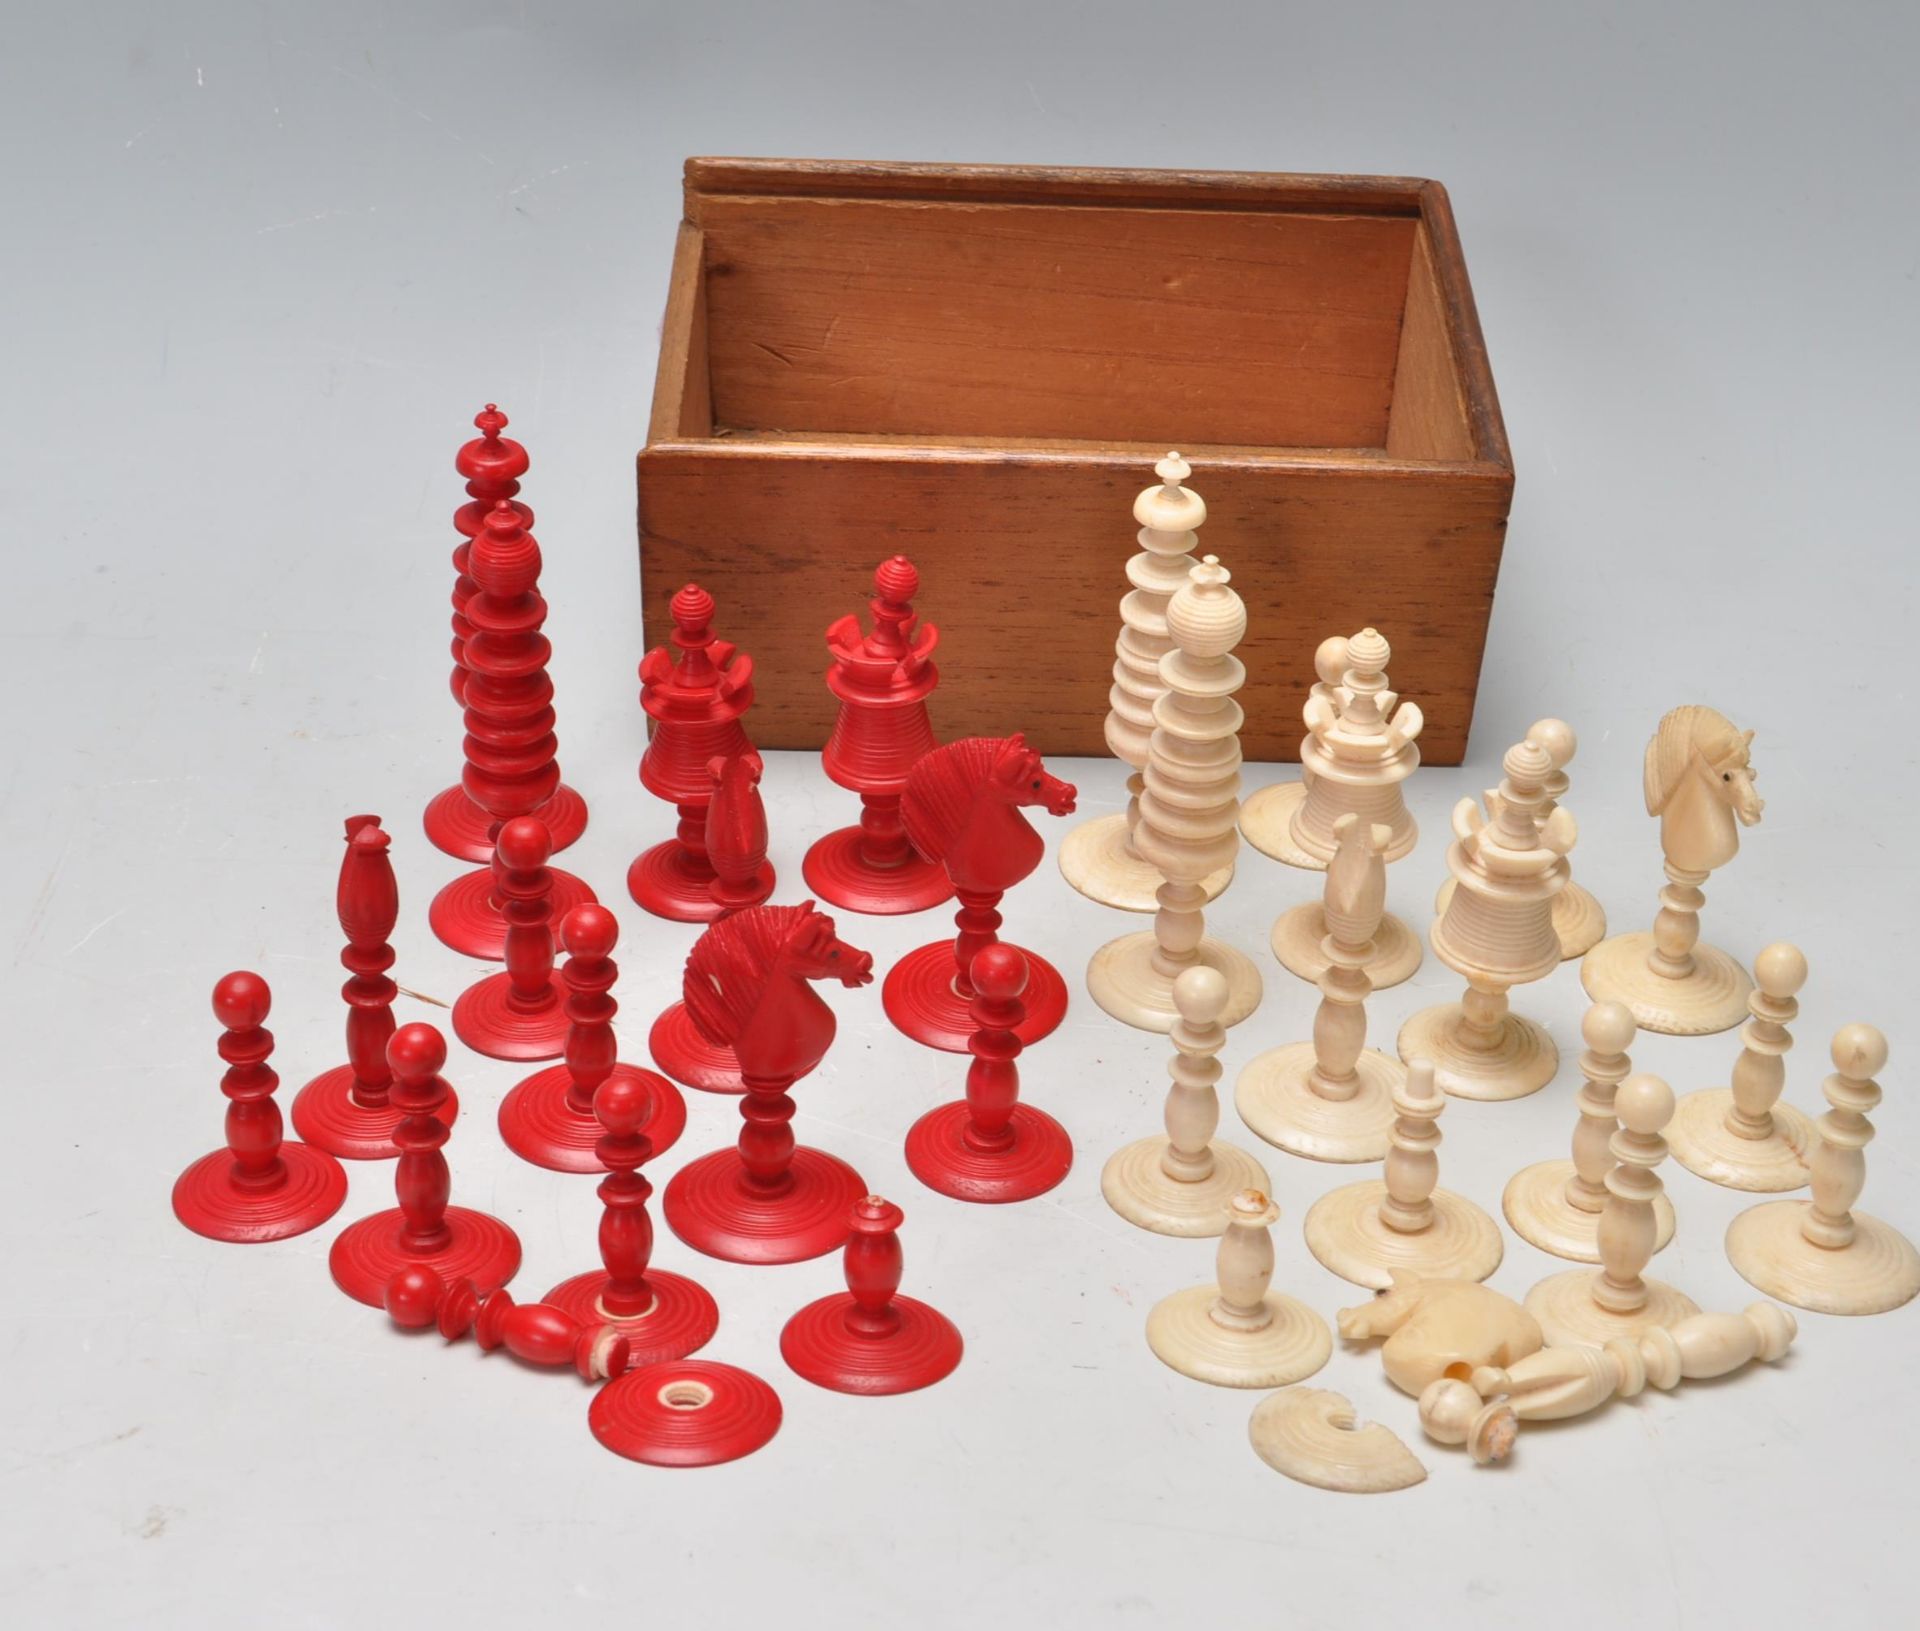 COLLECTION OF ANTIQUE 19TH CENTURY CHESS PIECES